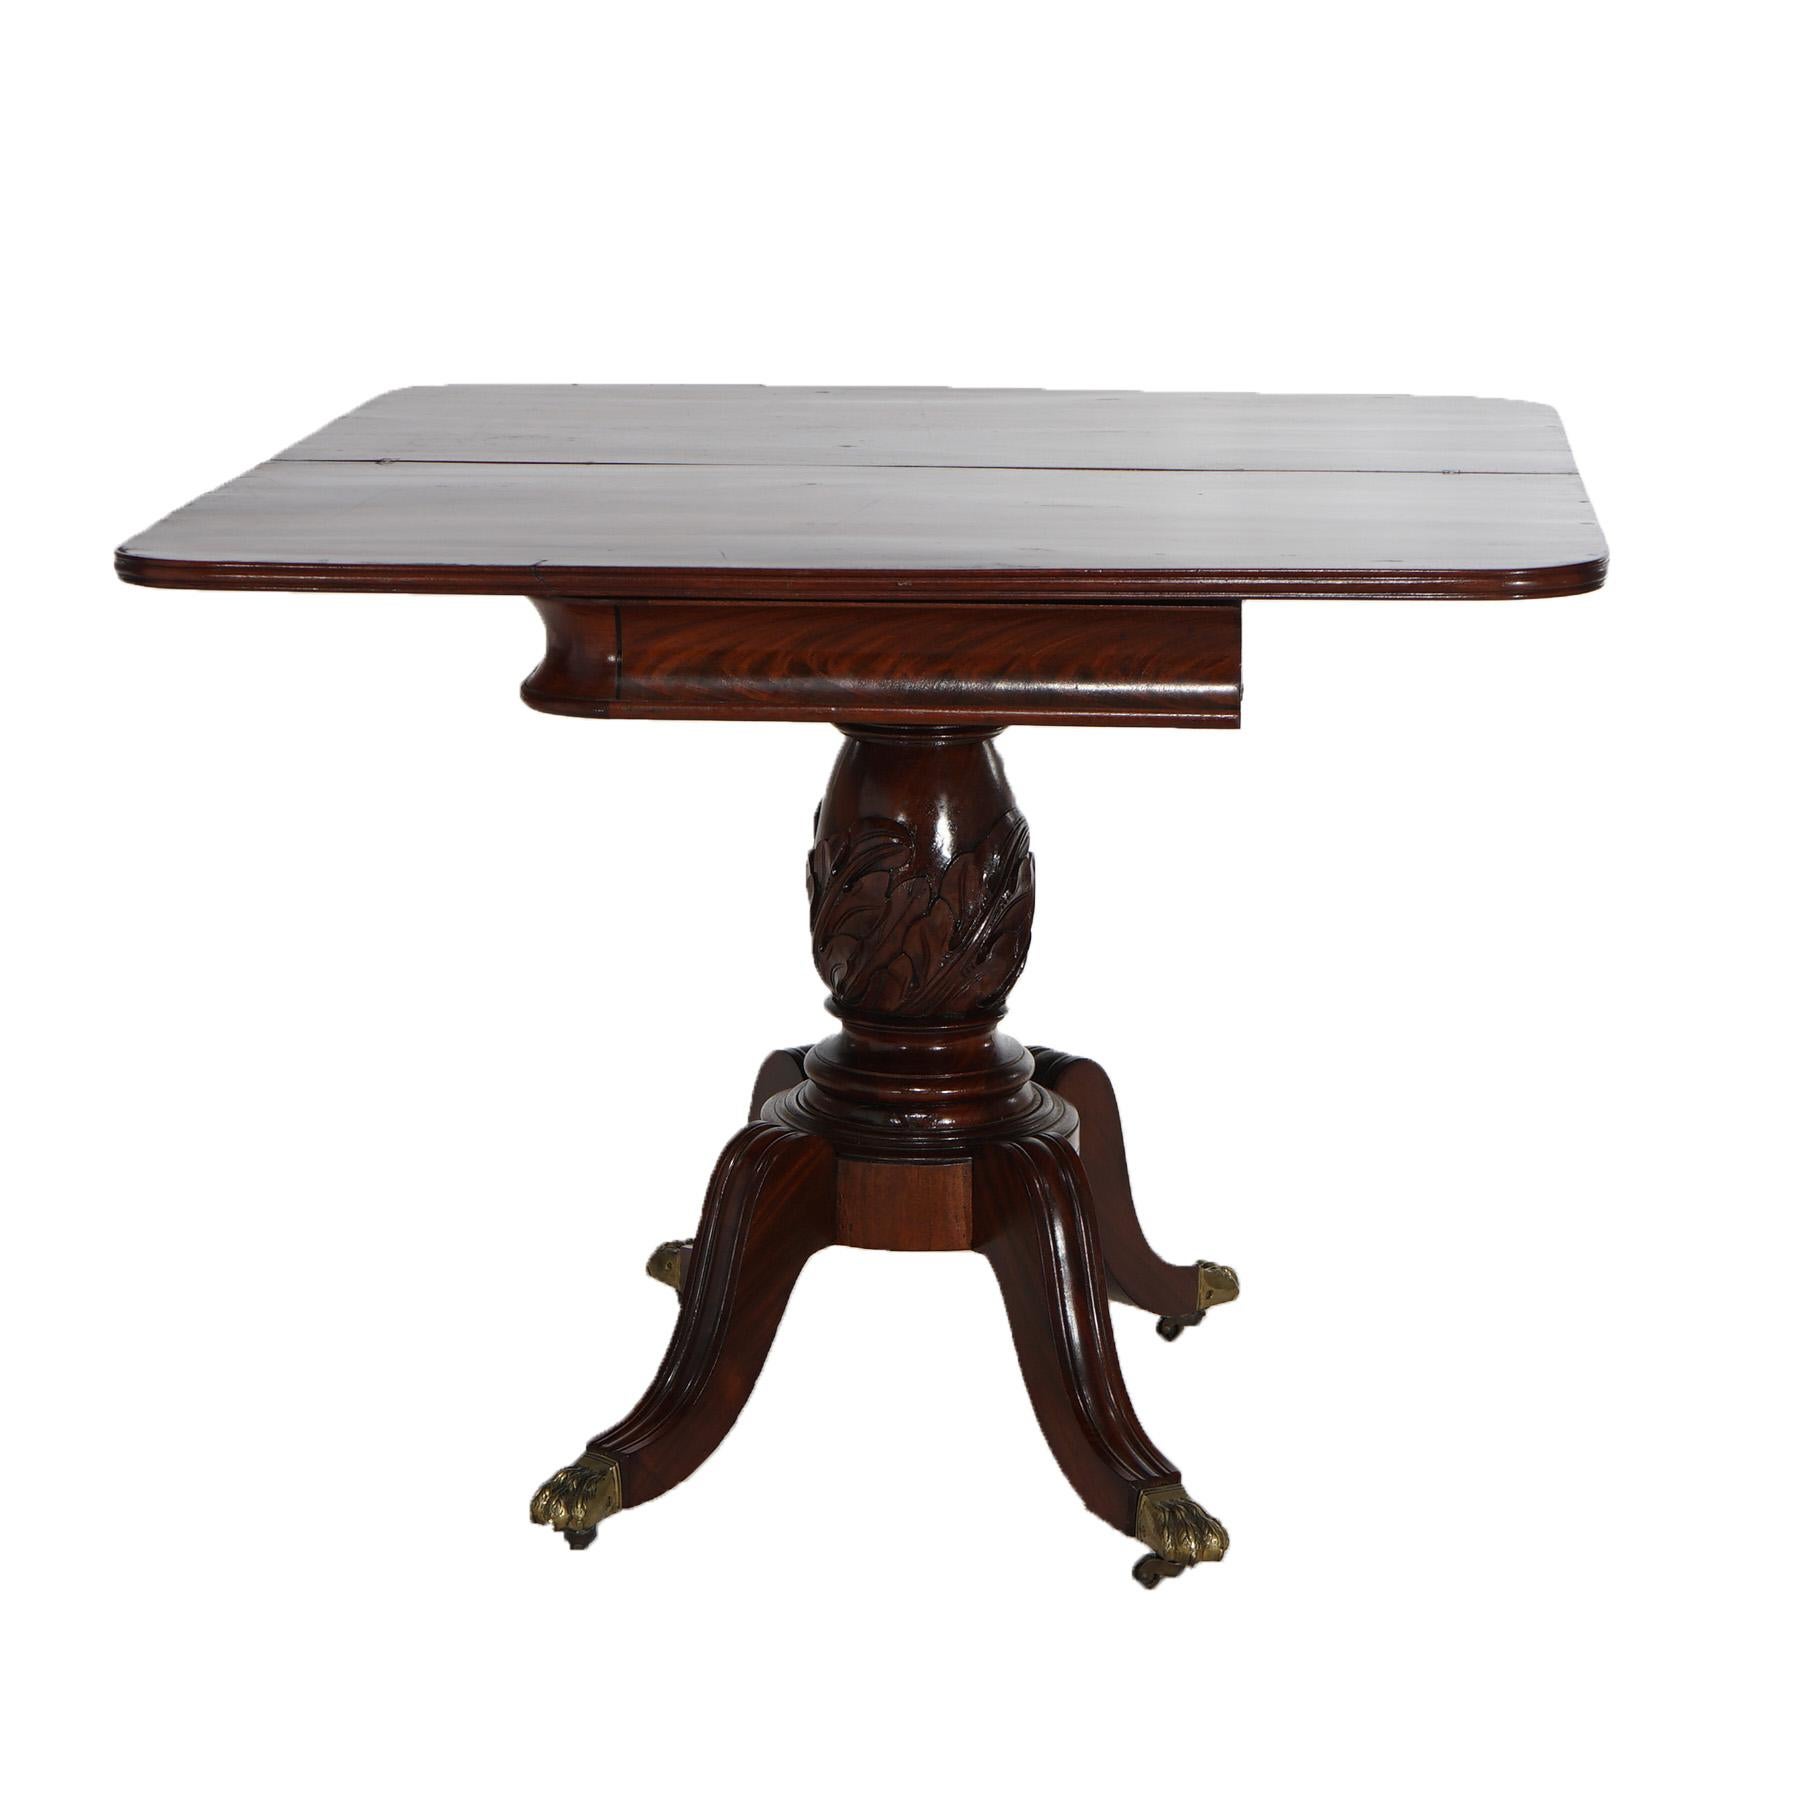 An antique game table in the manner of Duncan Phyfe offers flame mahogany construction with folded top over foliate carved column and raised on convex fluted legs terminating in cast brass caps in paw form, c1830

Measures- 28.75''H x 36''W x 36.5''D